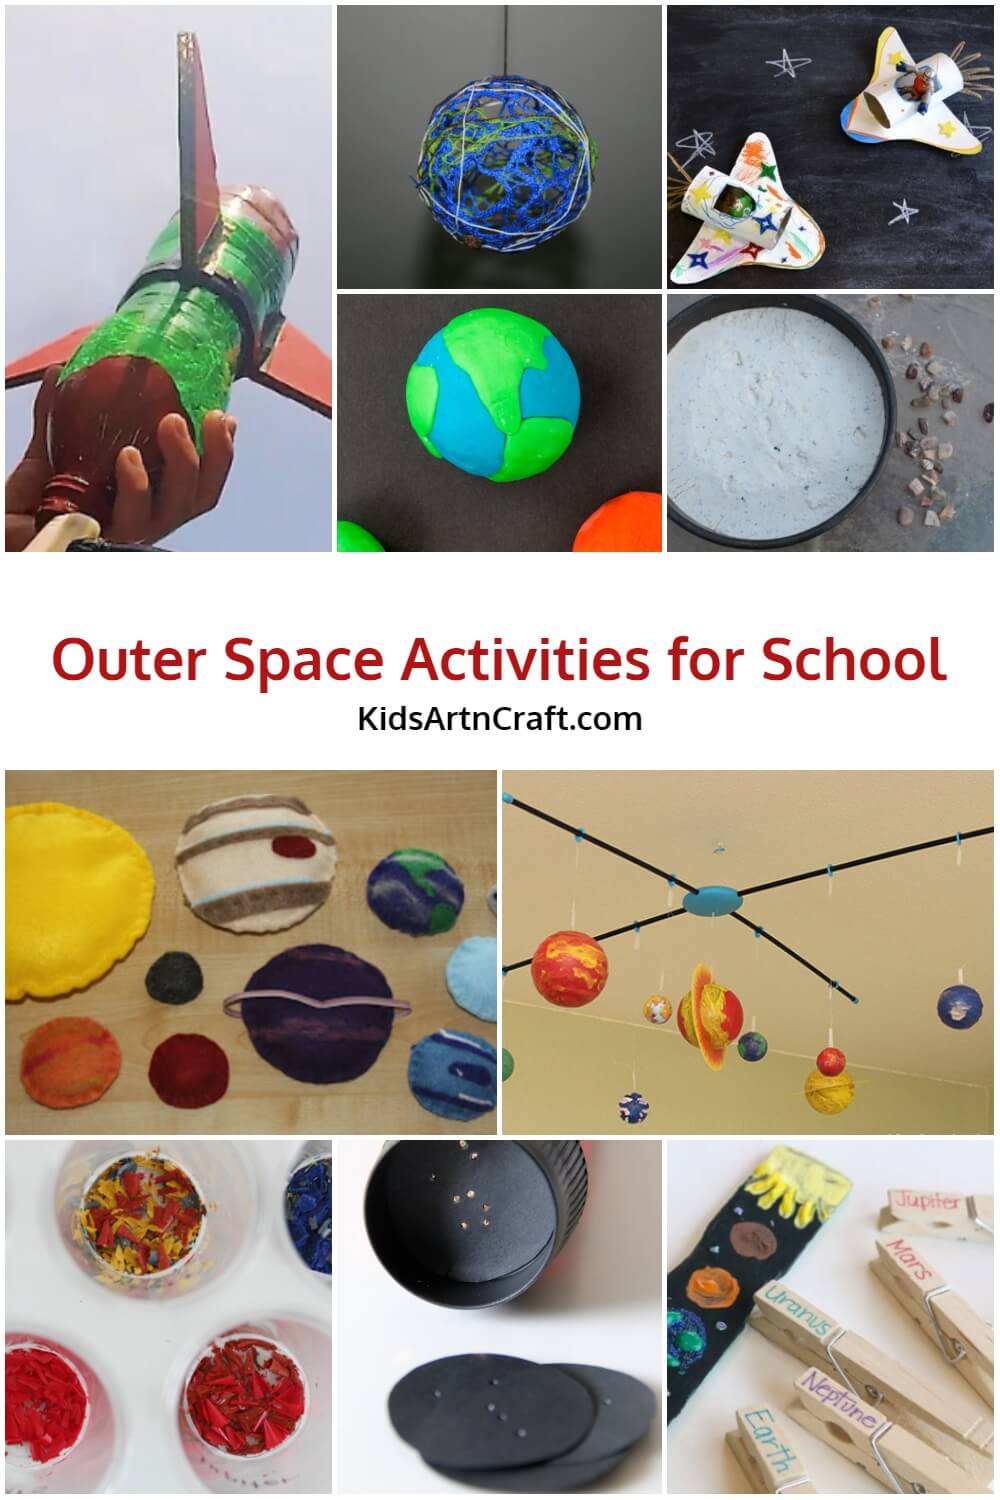 Outer Space Activities for School